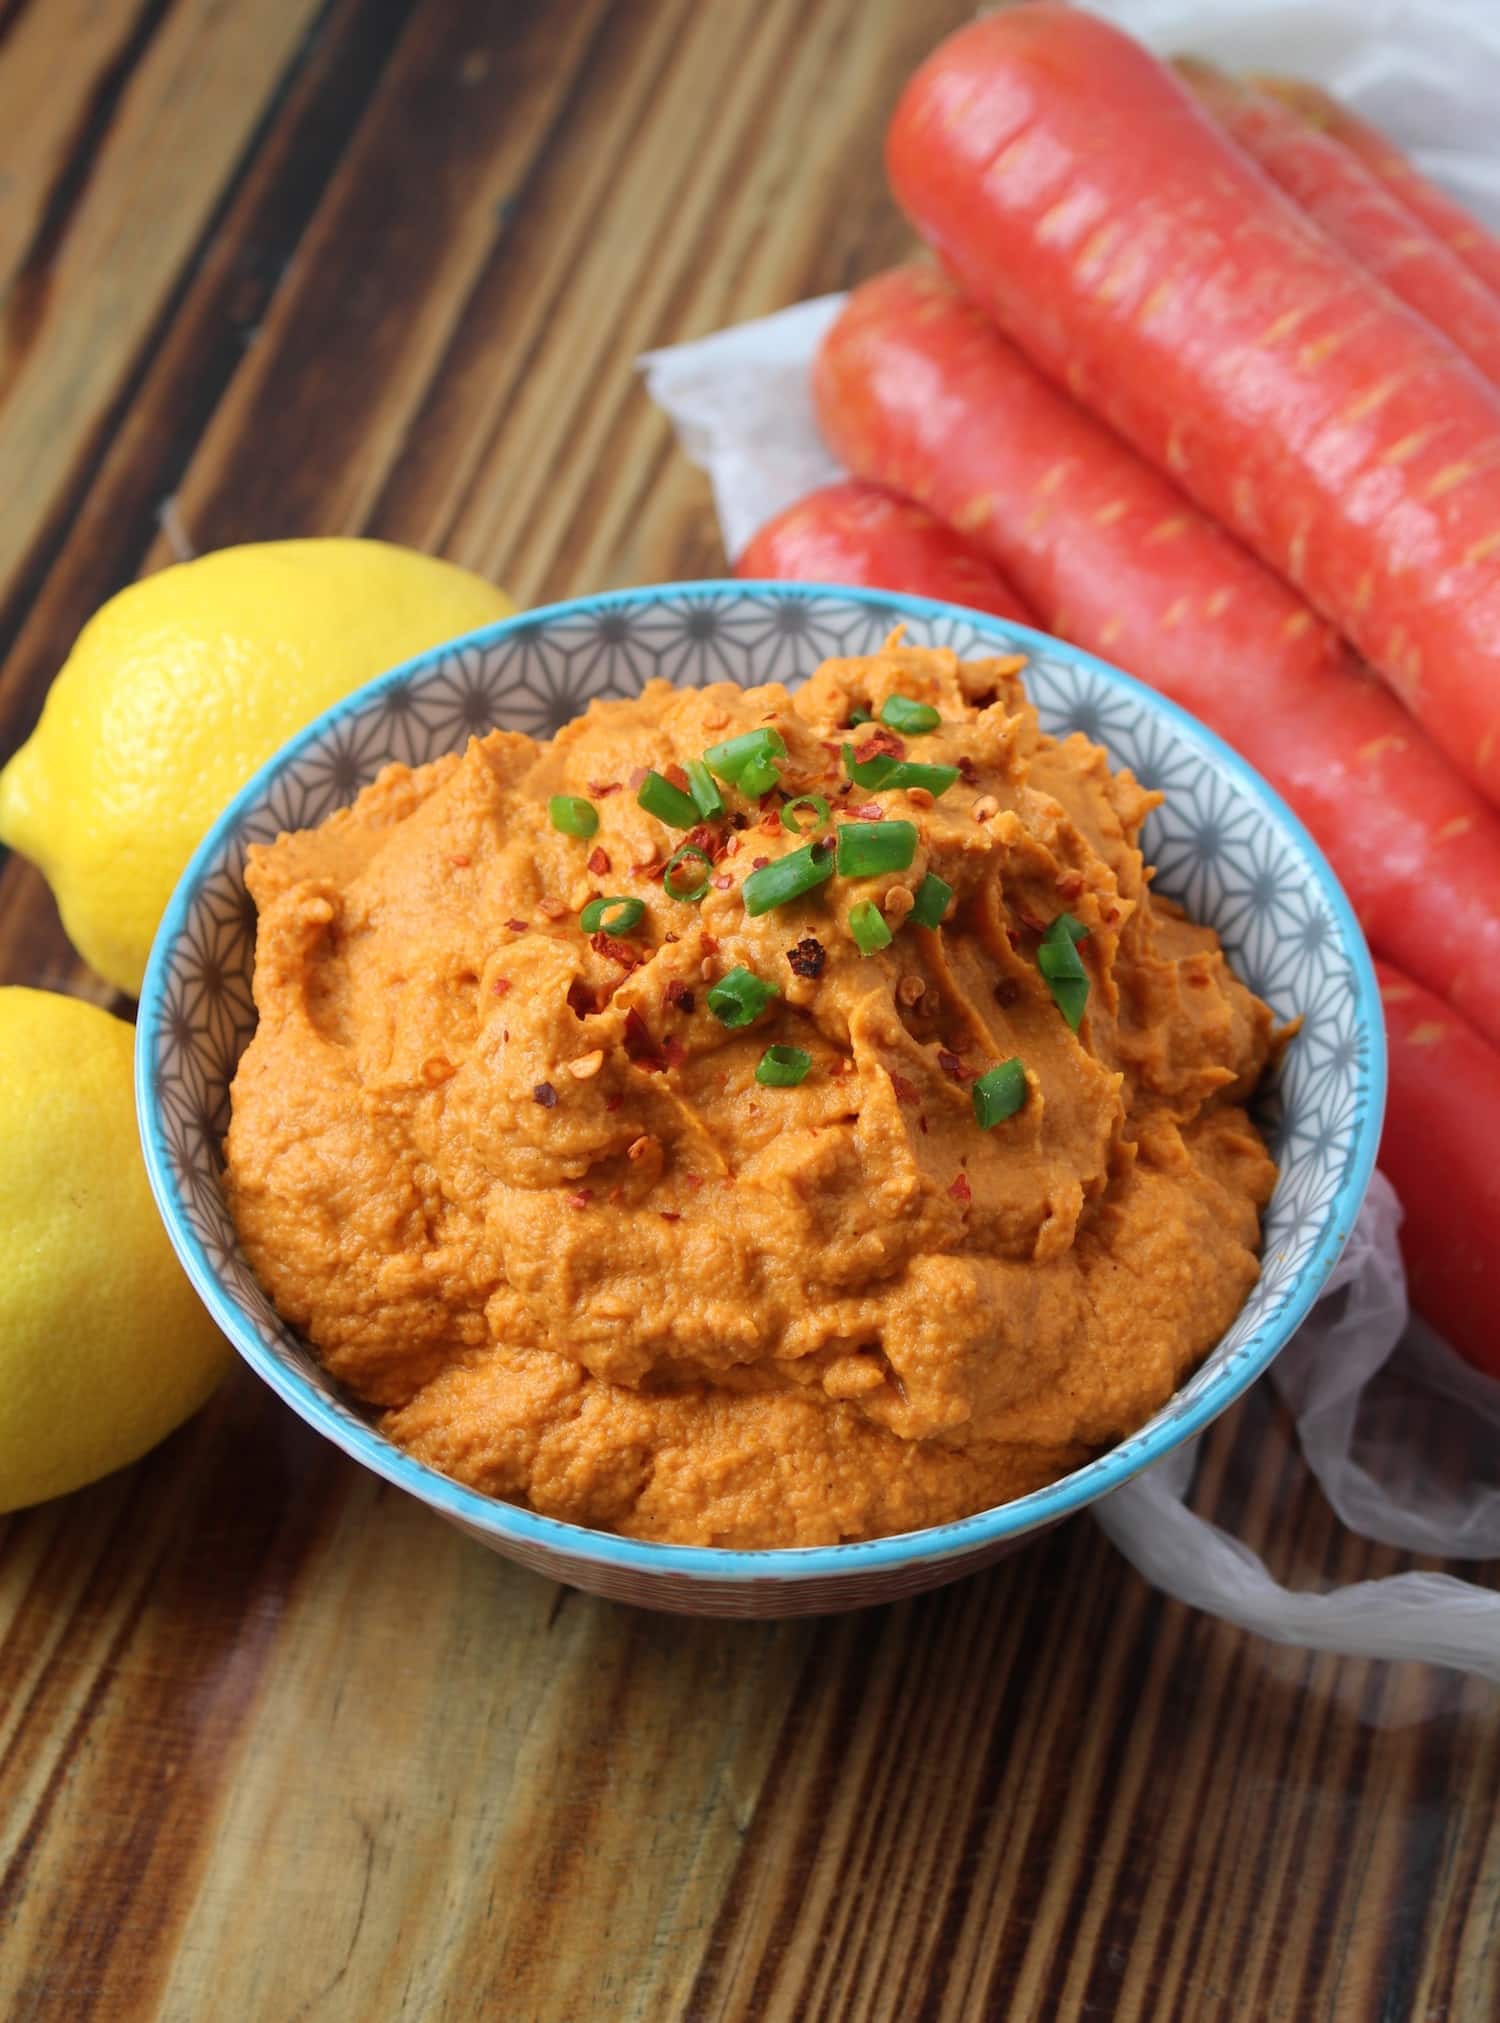 beanless carrot hummus in a bowl on the table next to carrots and lemons